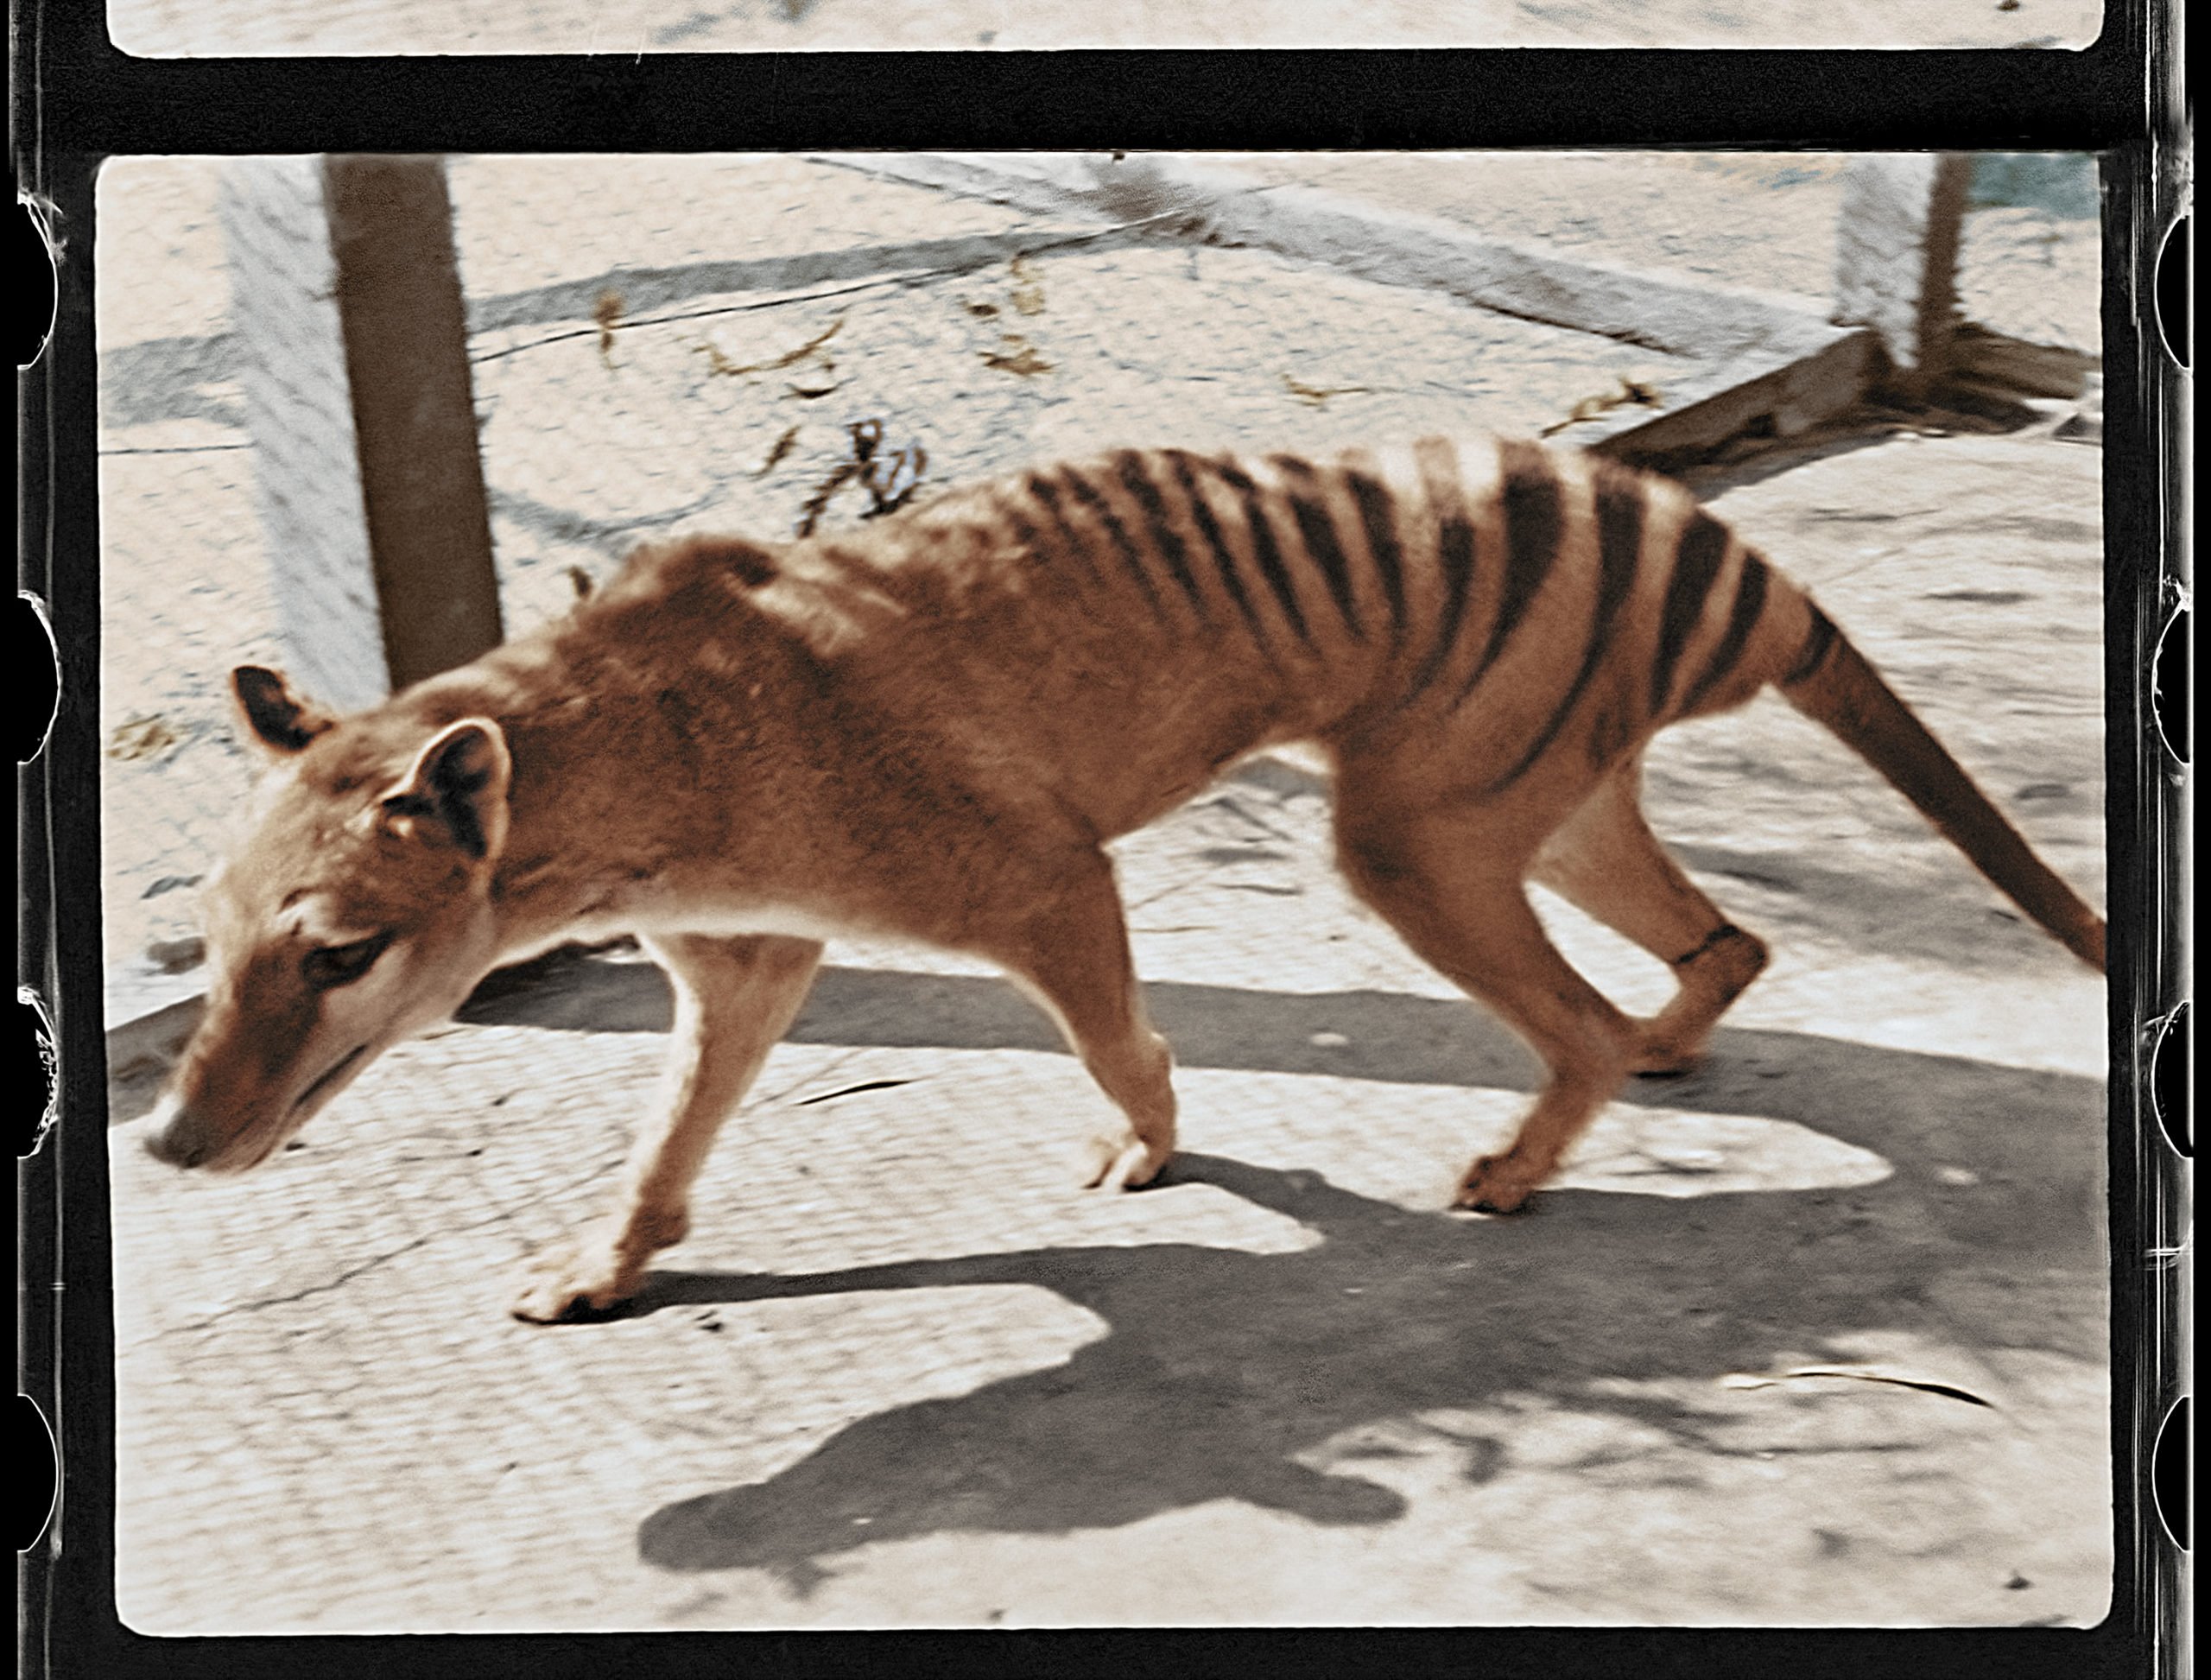 Watch footage of lastknown surviving Tasmanian tiger remastered and in